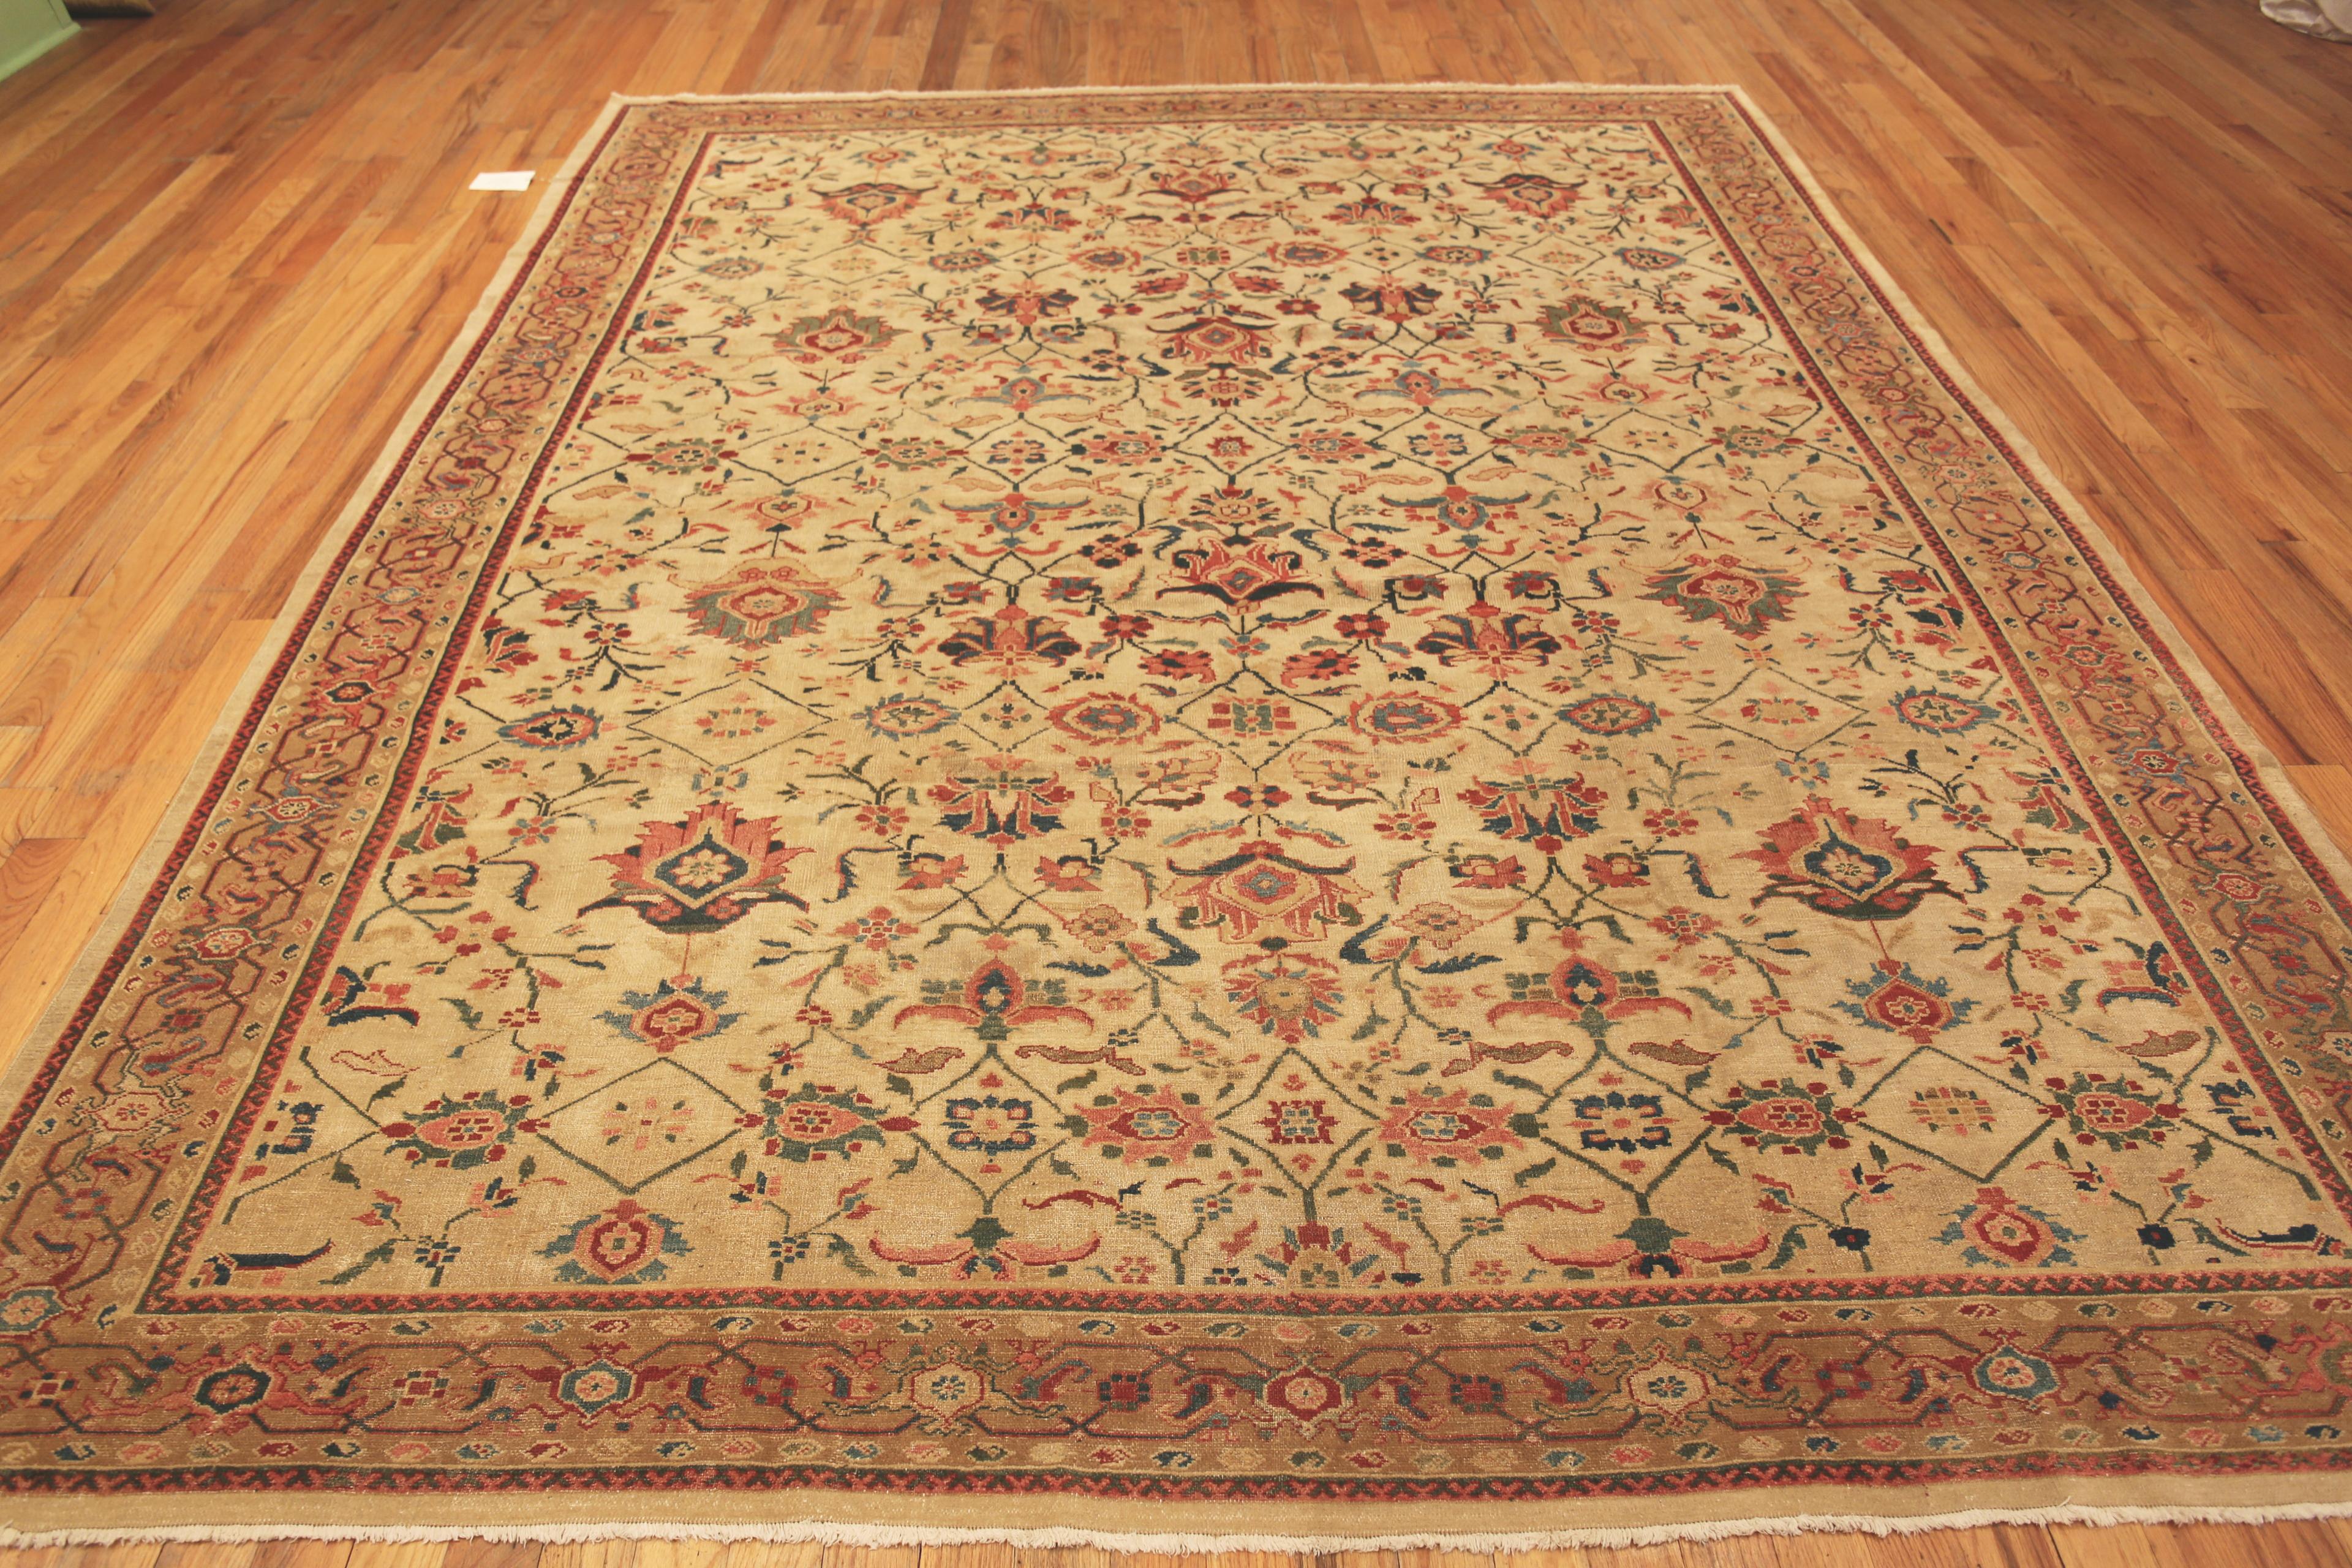 Beautiful Decorative Antique Rustic Ivory Persian Sultanabad Jewel Tone Rug, Country of Origin: Persia, Circa Date: 1900. Size: 9 ft 3 in x 11 ft 3 in (2.82 m x 3.43 m)

 